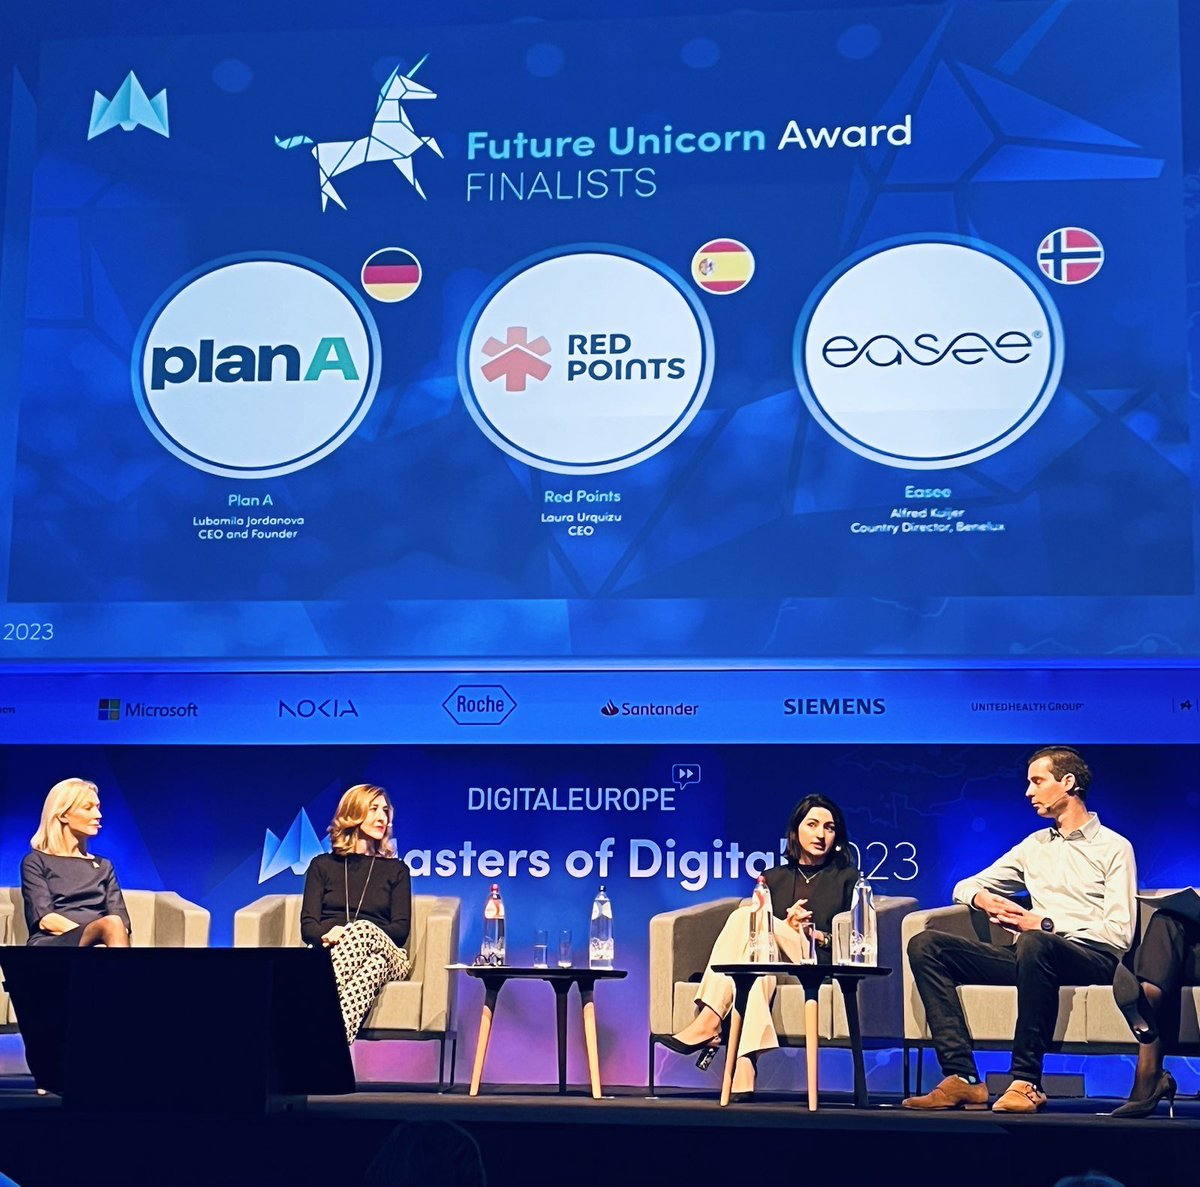 We are very proud of planA that made it under the Top 3 of Digital Europe‘s Future Unicorn Award 🦄👏#MoD2023

Thank you also for the great contribution @LubomilaJ on how we can make the EU market more attractive for startups!🙏🏻